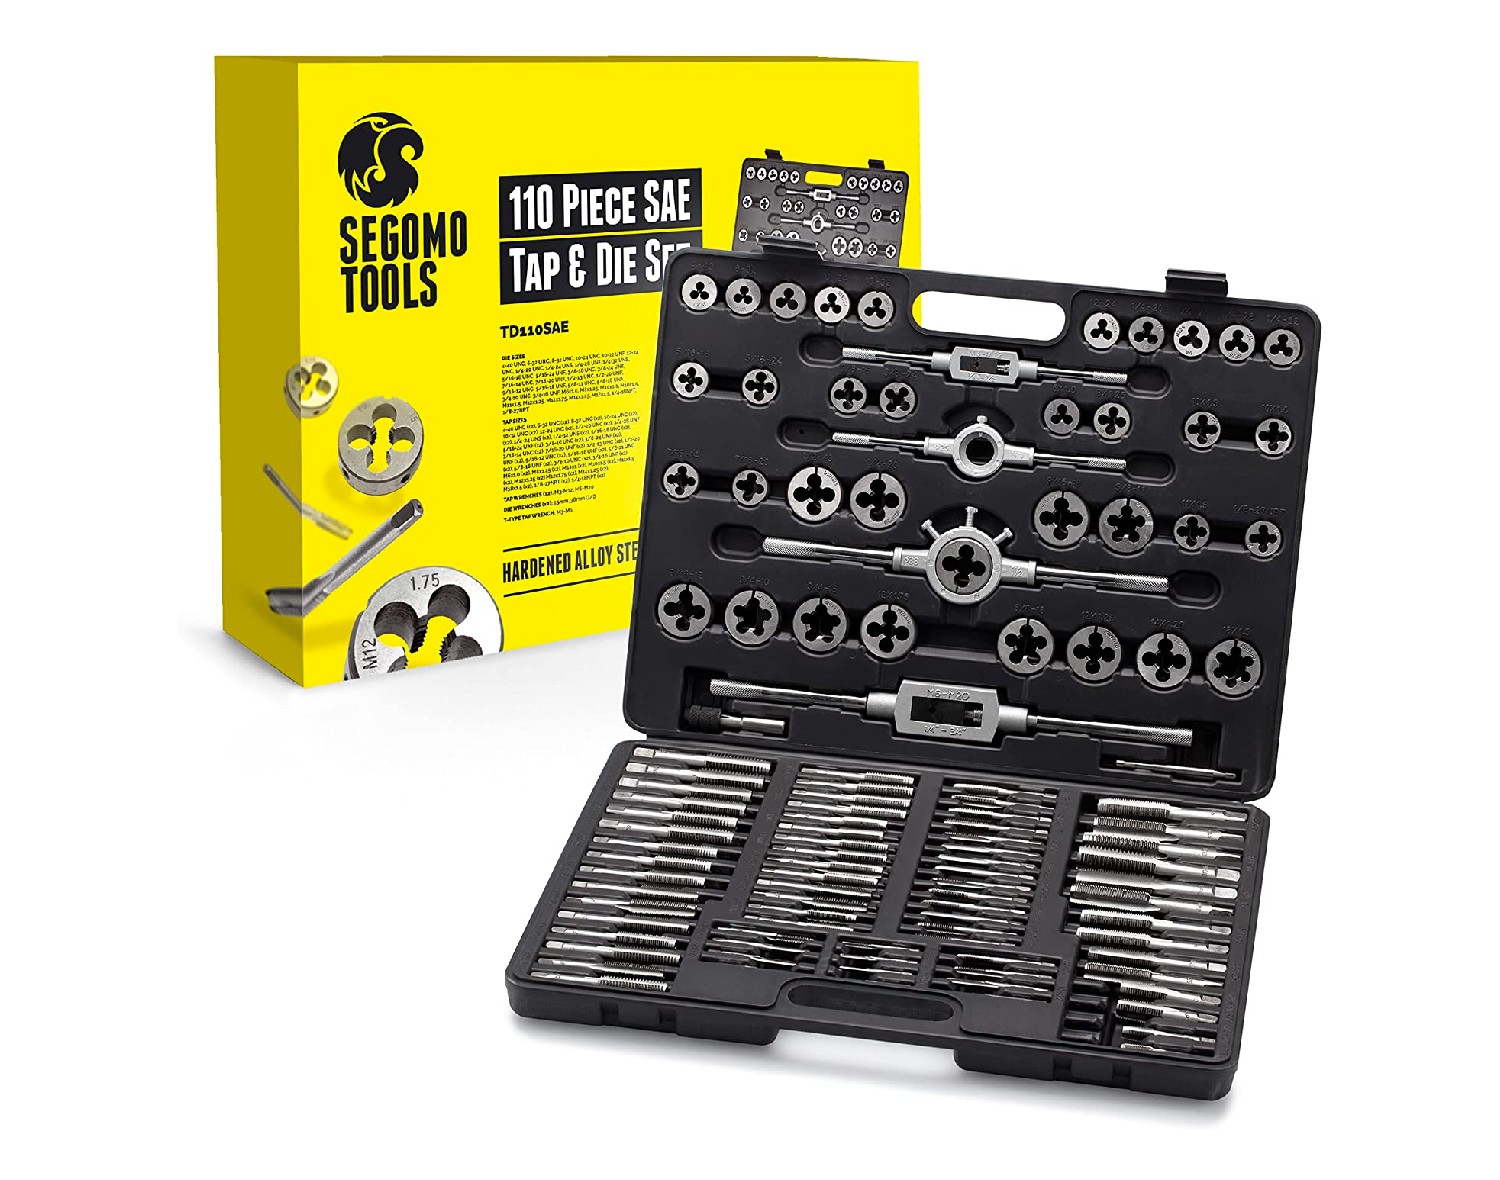 Standard SAE Tap and Die Set 40 Piece w/Case Threading Chasing 